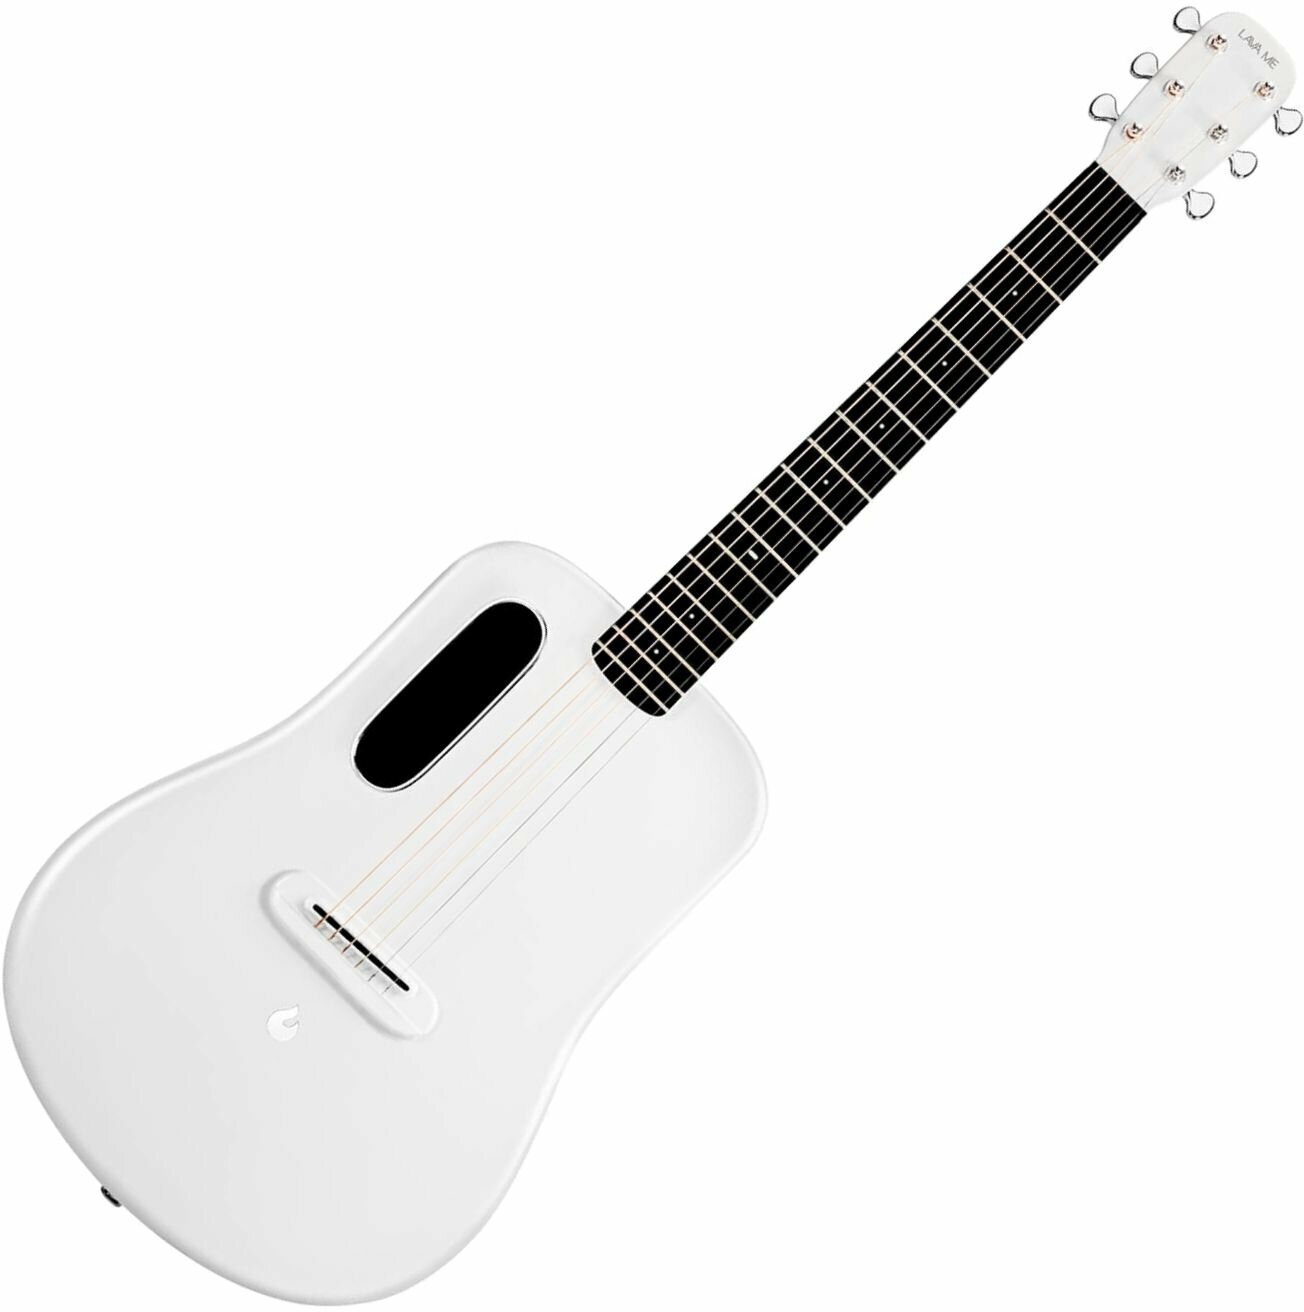 Electro-acoustic guitar Lava Music ME 3 36" Space Bag White (Pre-owned)